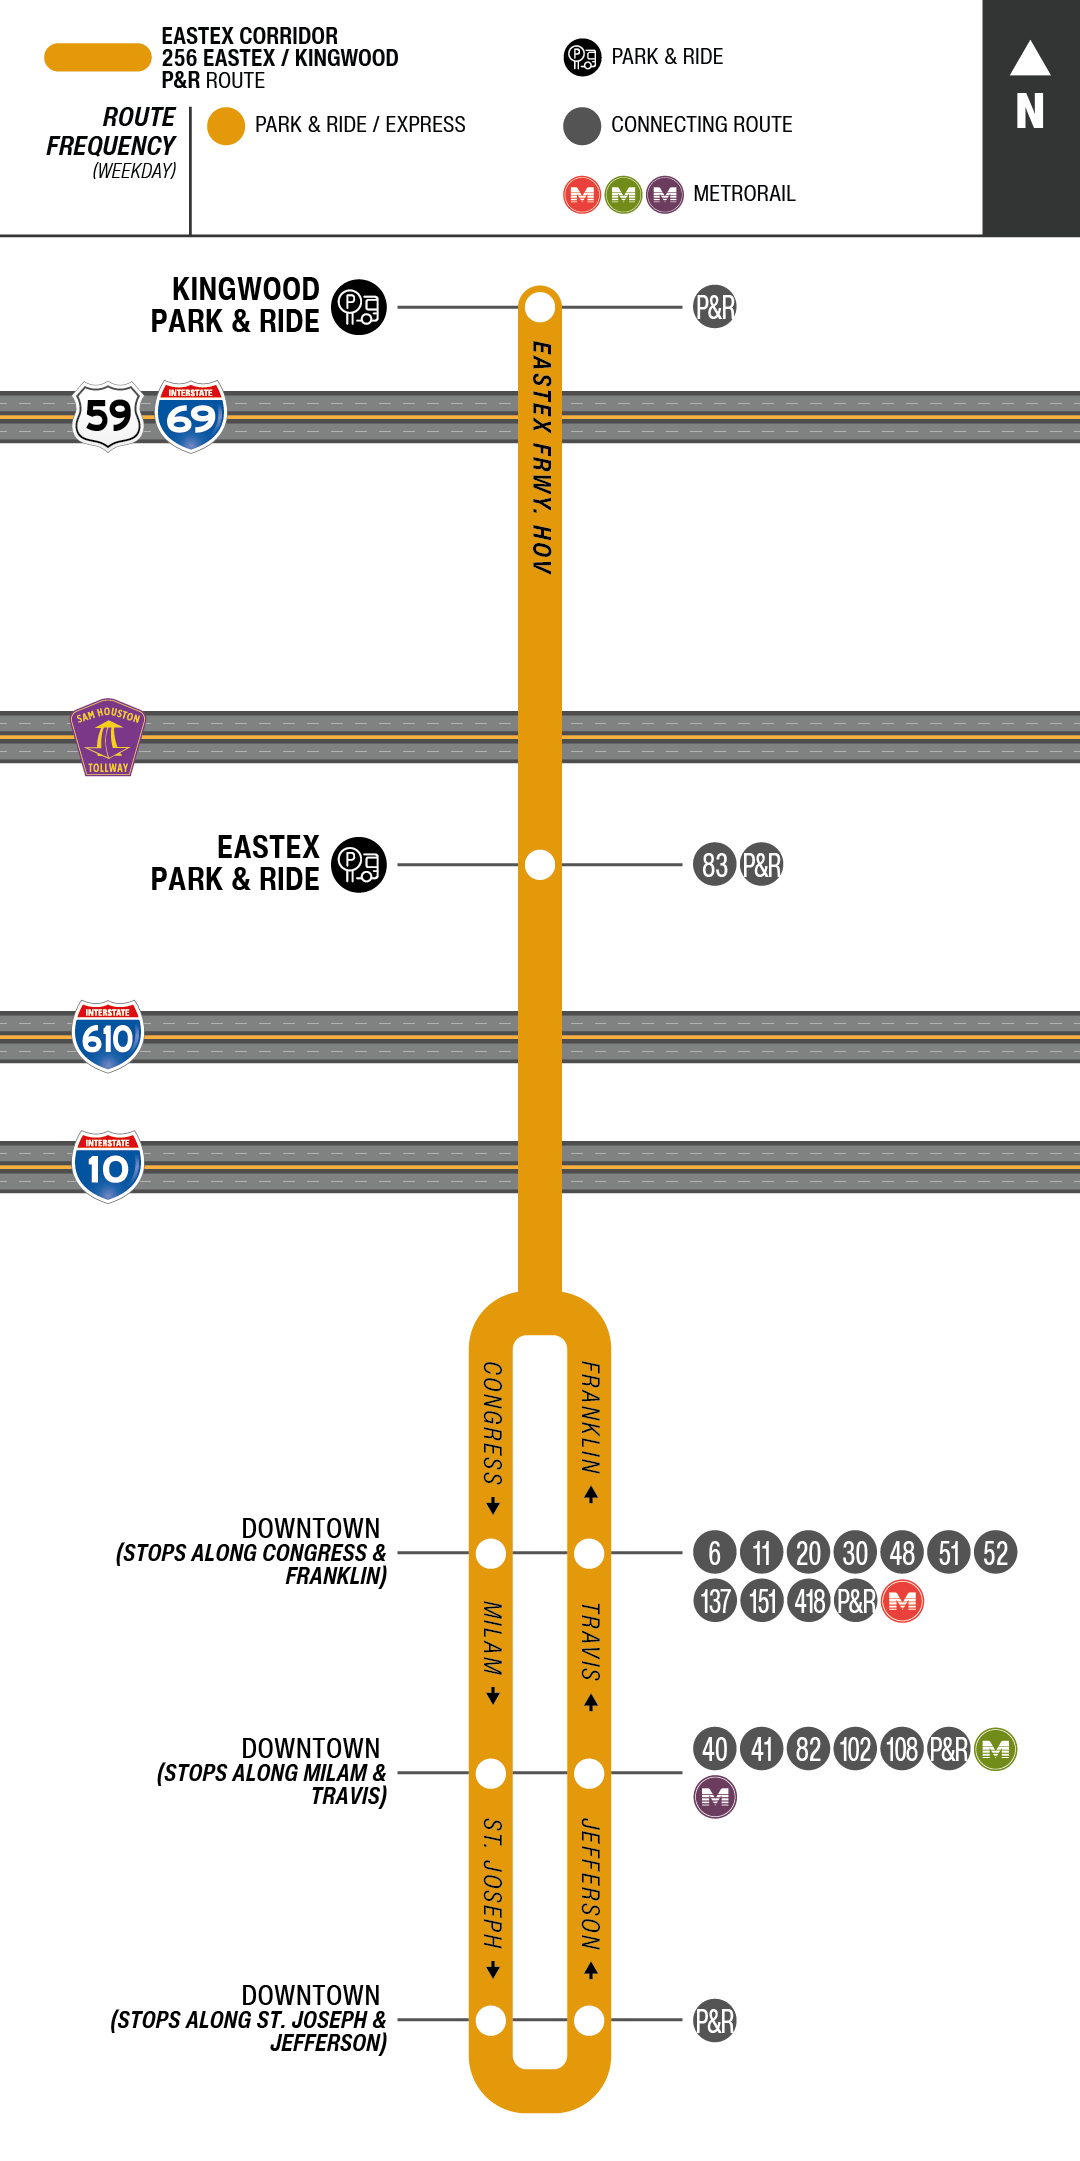 Route map for 256 Eastex / Kingwood Park & Ride bus